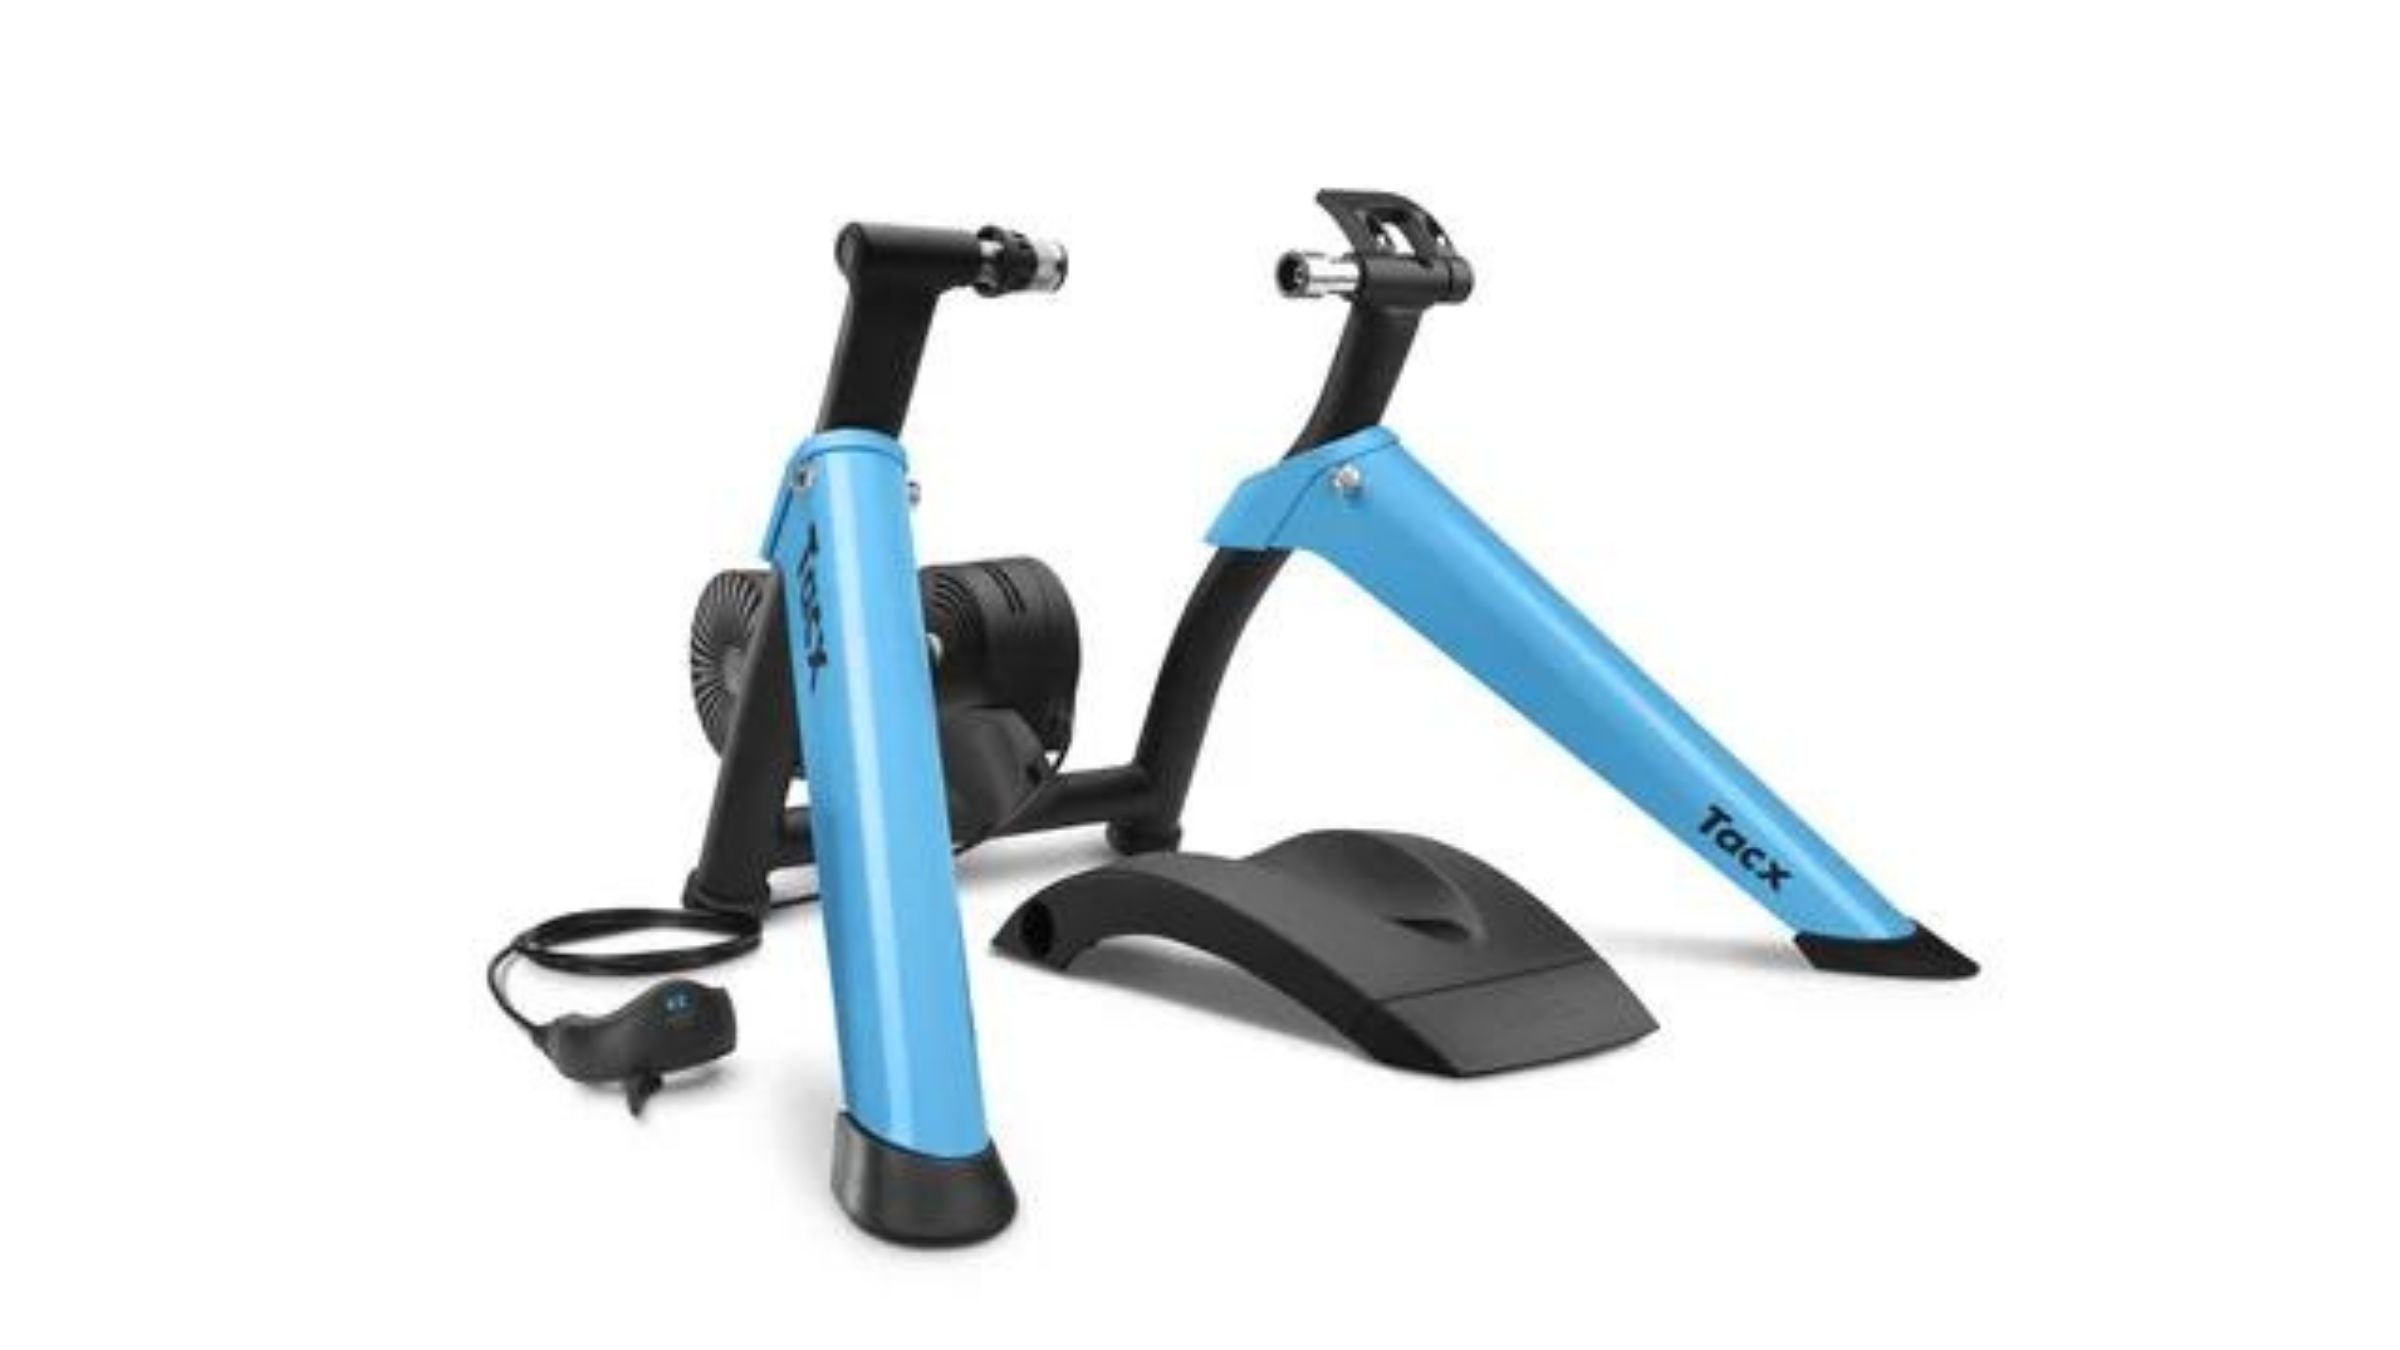 The Tacx boost bike trainer, one of the best bike trainers for triathletes